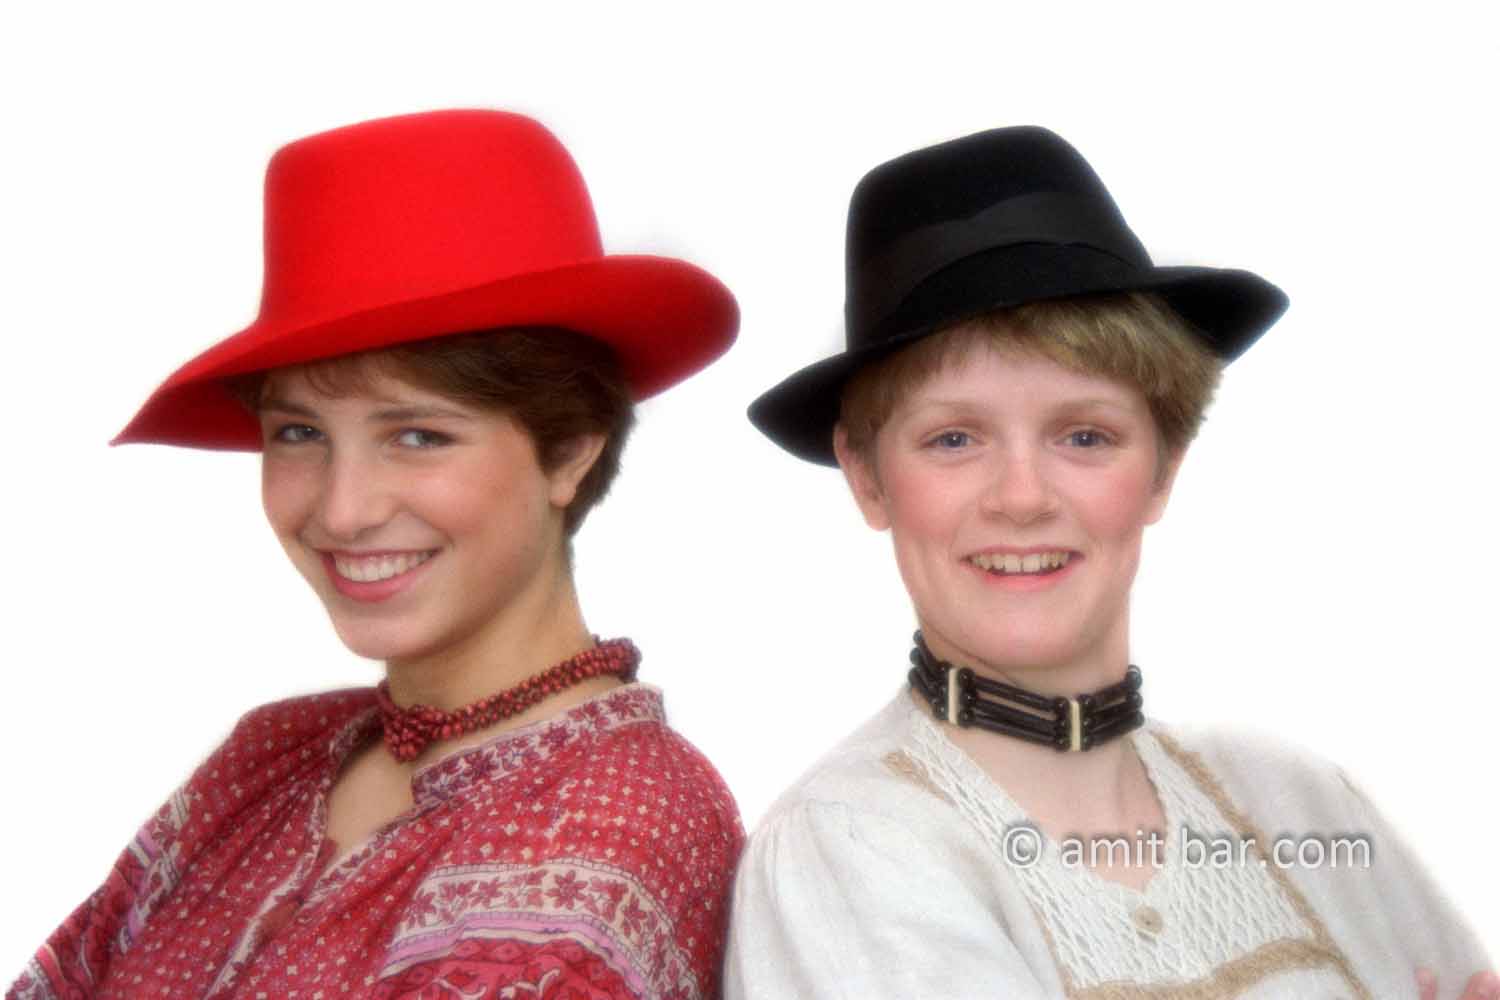 Portrait of two young girls: Portrait of two young girls with hats